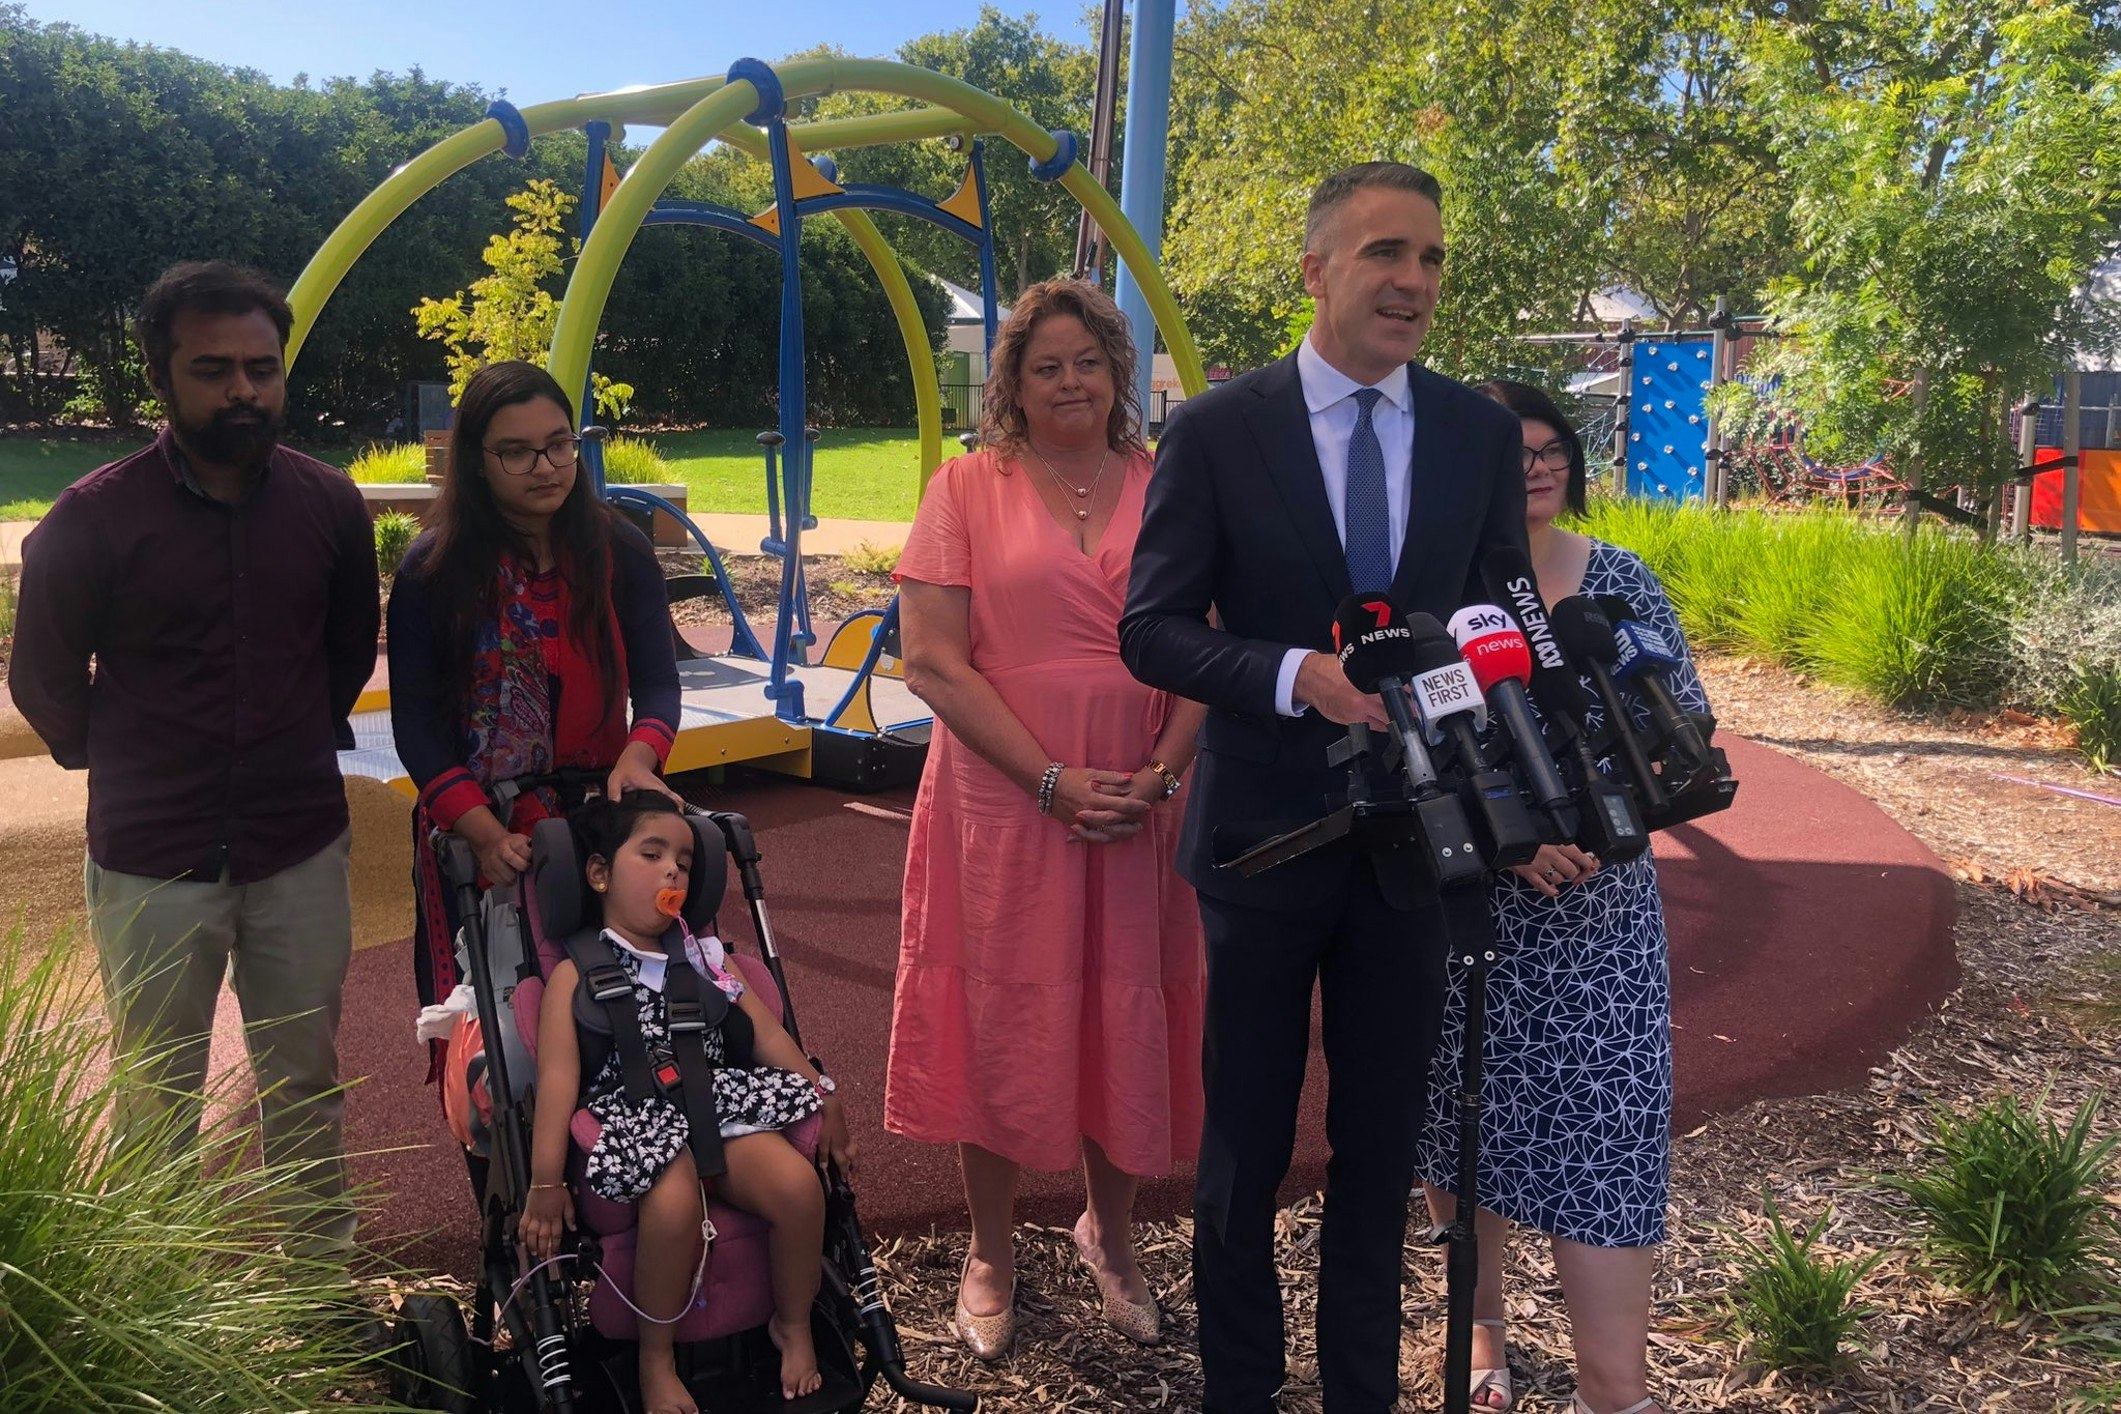 <p>South Australian Premier, Peter Malinauskas announcing the funding with Human Services Minister, Nat Cook, Tourism Minister, Zoe Bettison and a family from Bangladesh who will benefit from the pledge. [Source: Twitter]</p>
